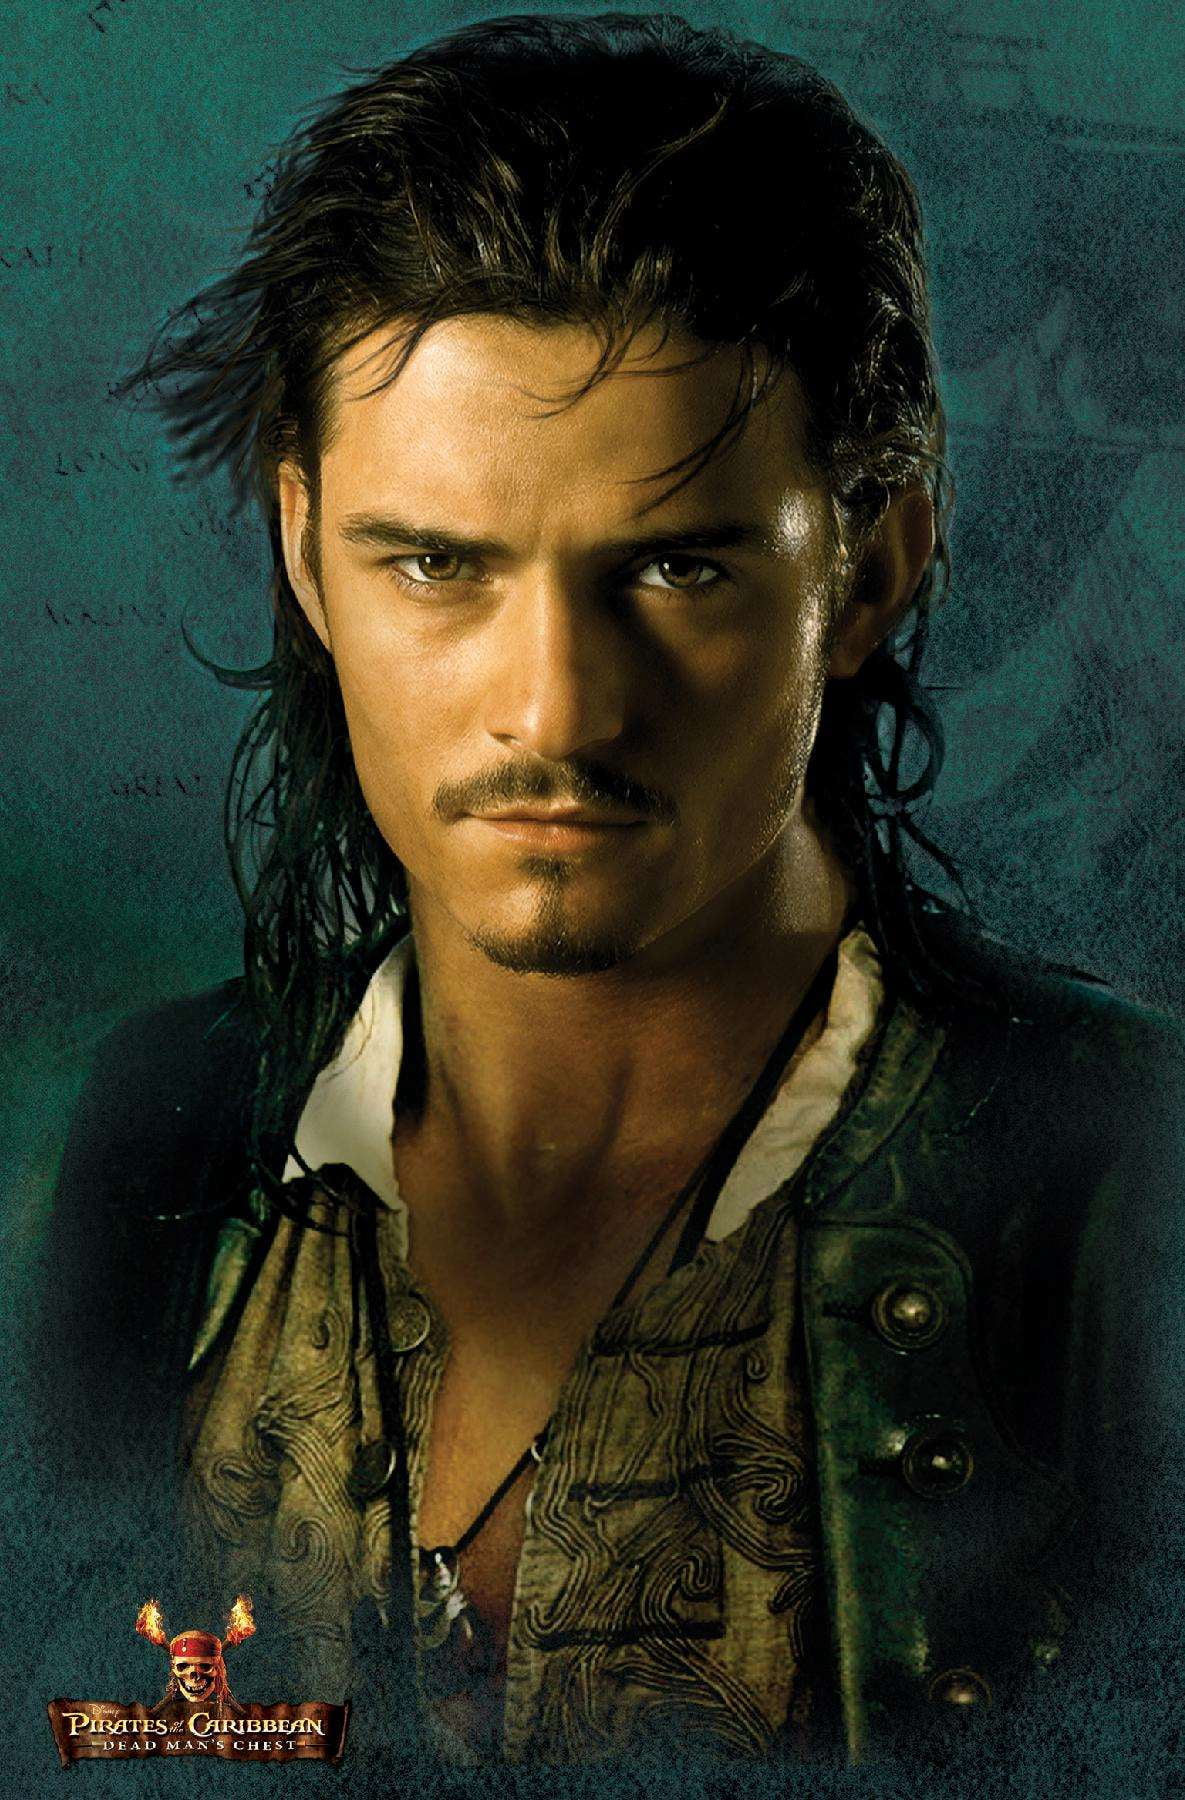 Disney Pirates of the Caribbean: Dead Man's Chest - Will Wall Poster,  14.725" x 22.375", Framed - Walmart.com